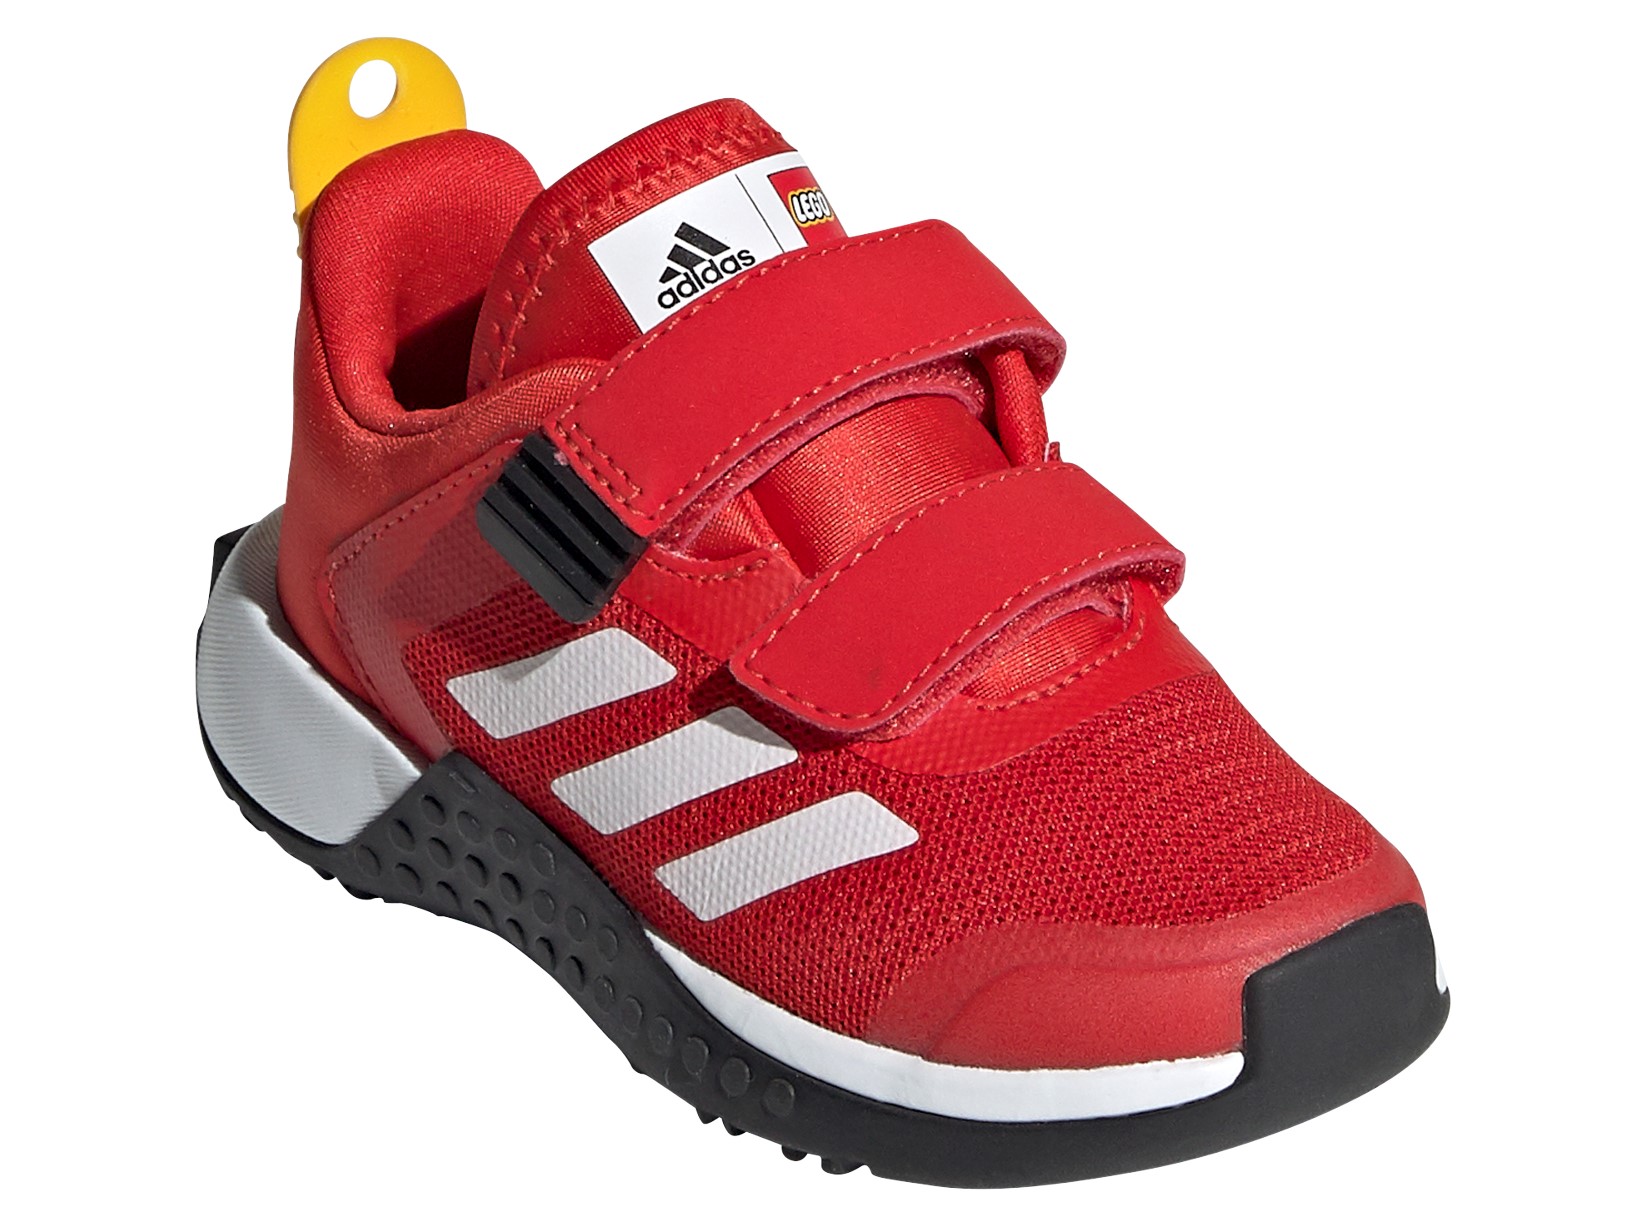 Adidas X Lego Sport Infant Shoes Adidas Buy Online At The Official Lego Shop Us